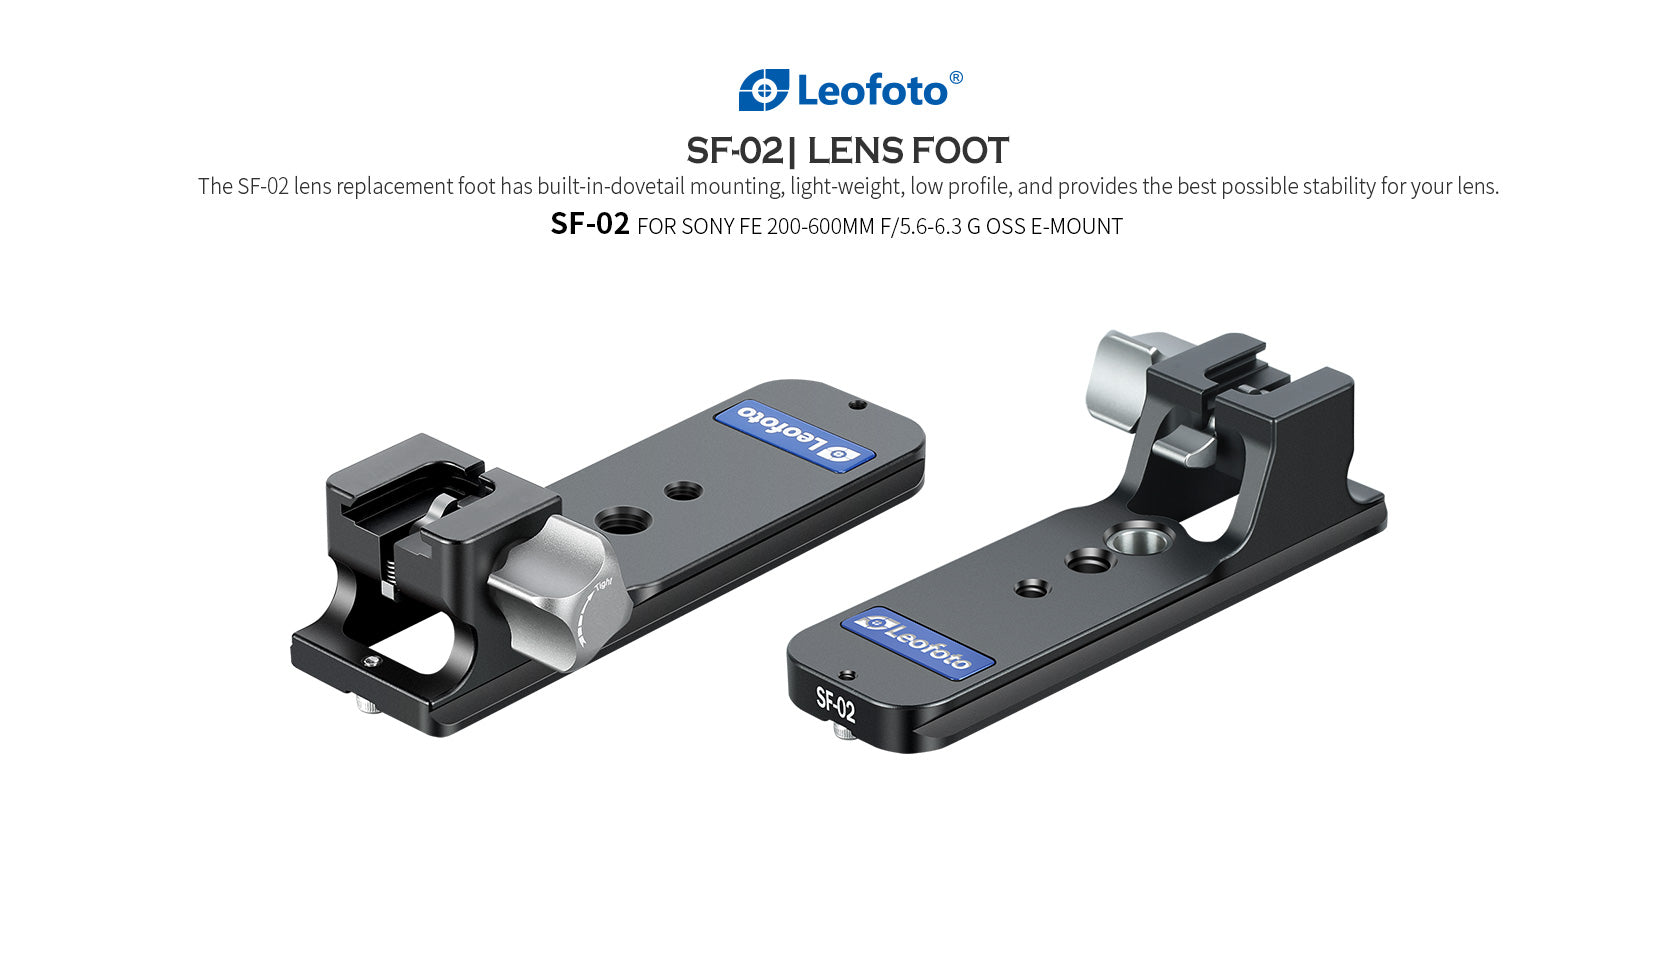 Leofoto SF-02 Lens Foot with Clamp for Sony FE 200-600mm f/5.6-6.3 G OSS Lens